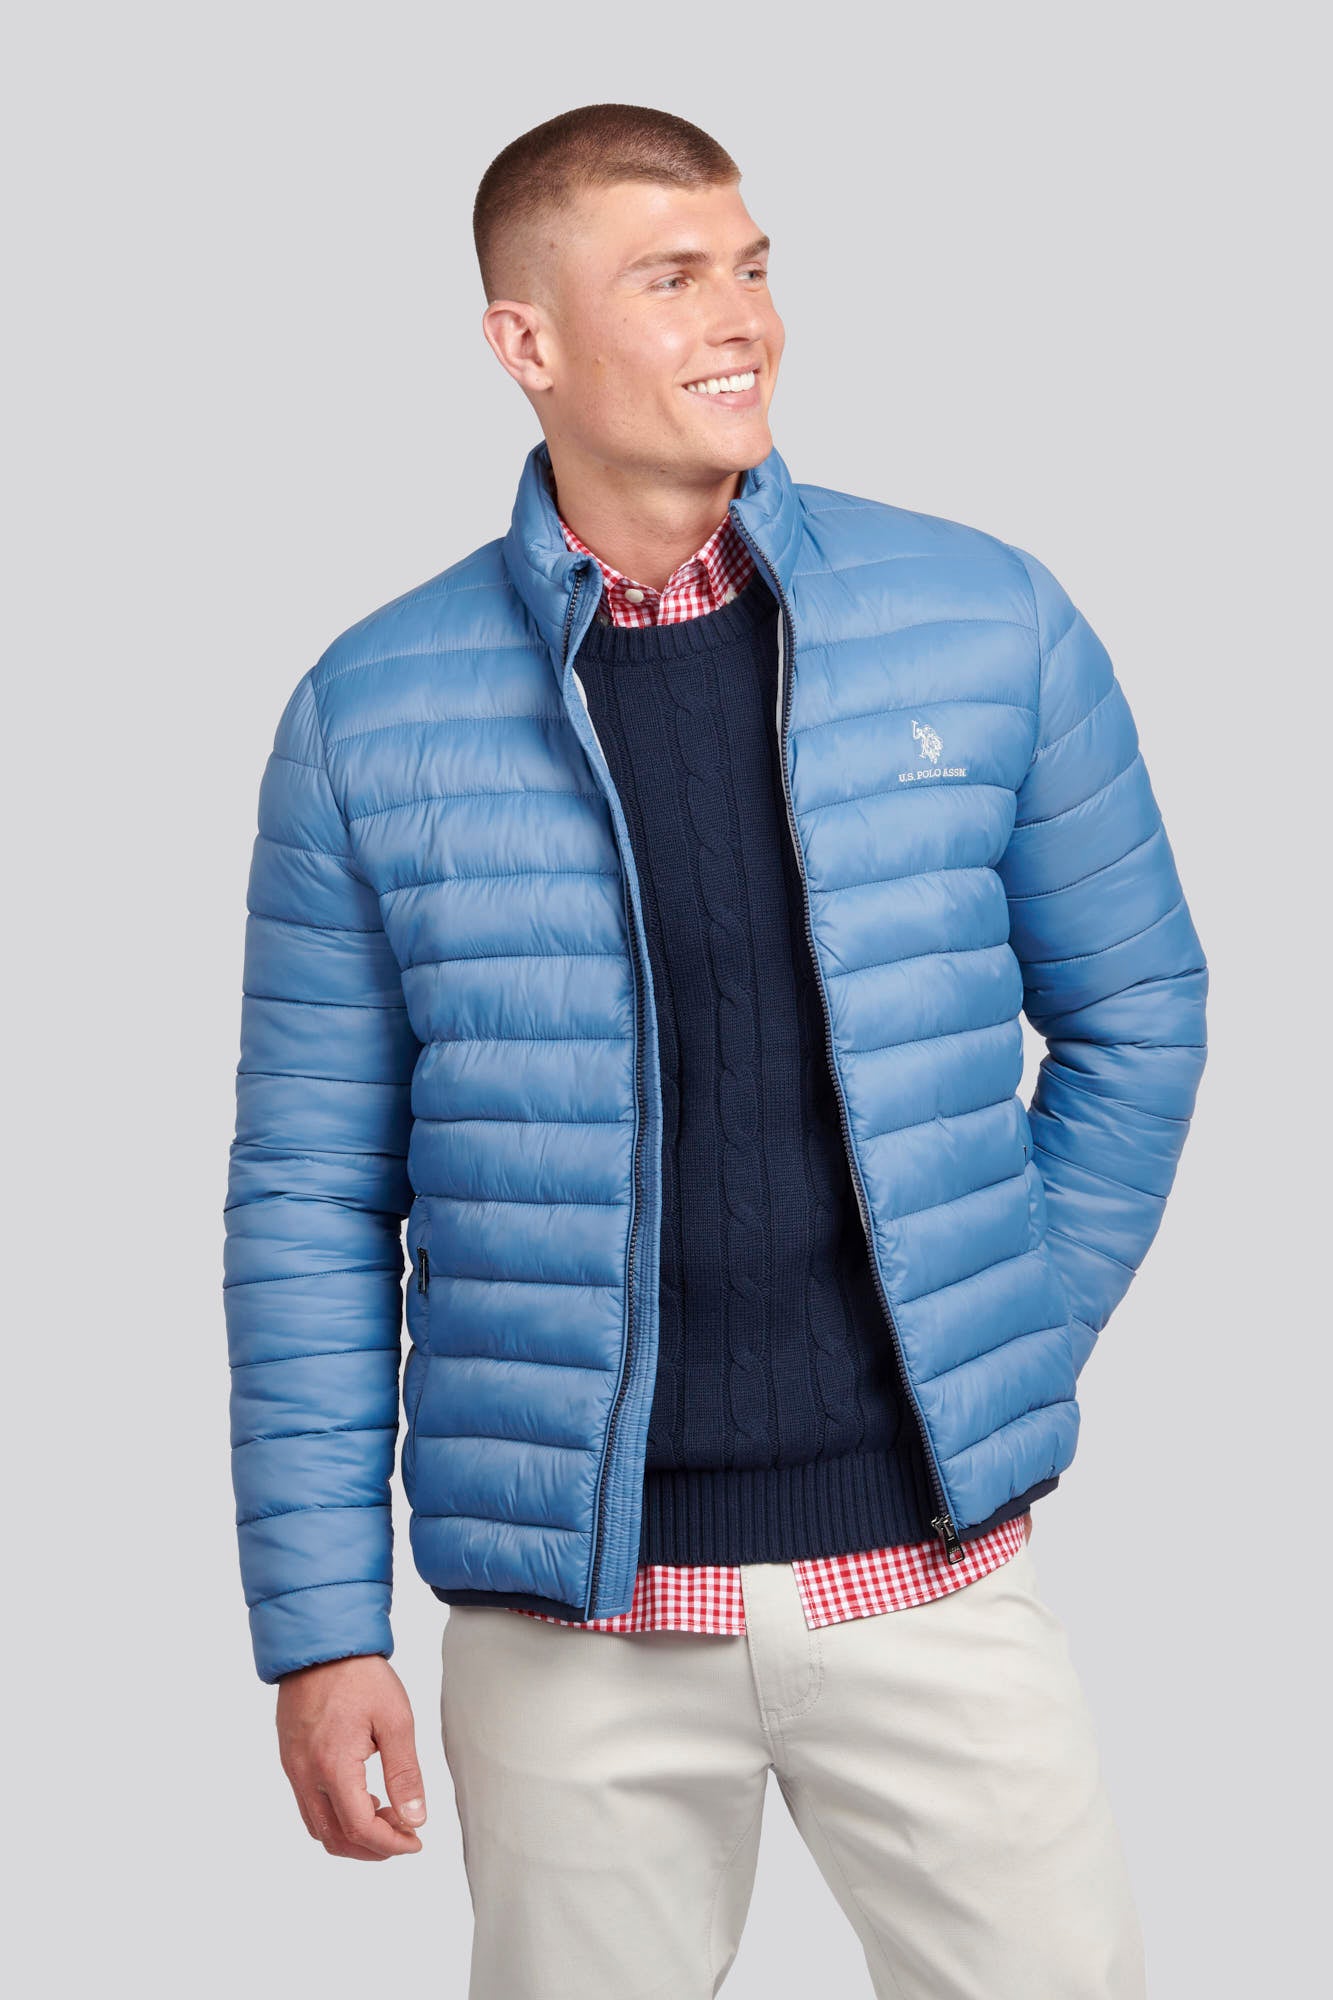 U.S. Polo Assn. Mens Lightweight Bound Quilted Jacket in Blue Horizon